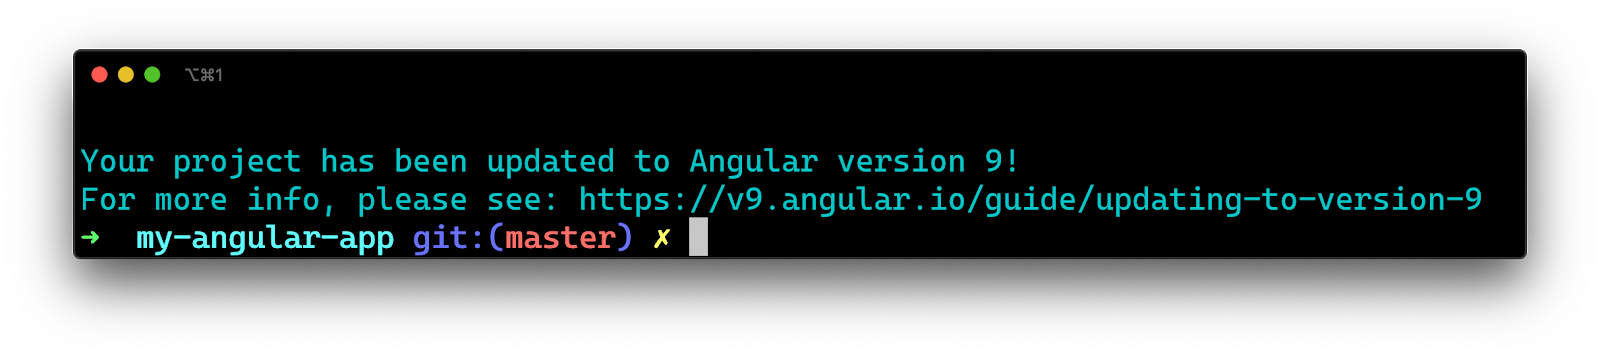 Terminal - Updating to Angular 9 confirmation